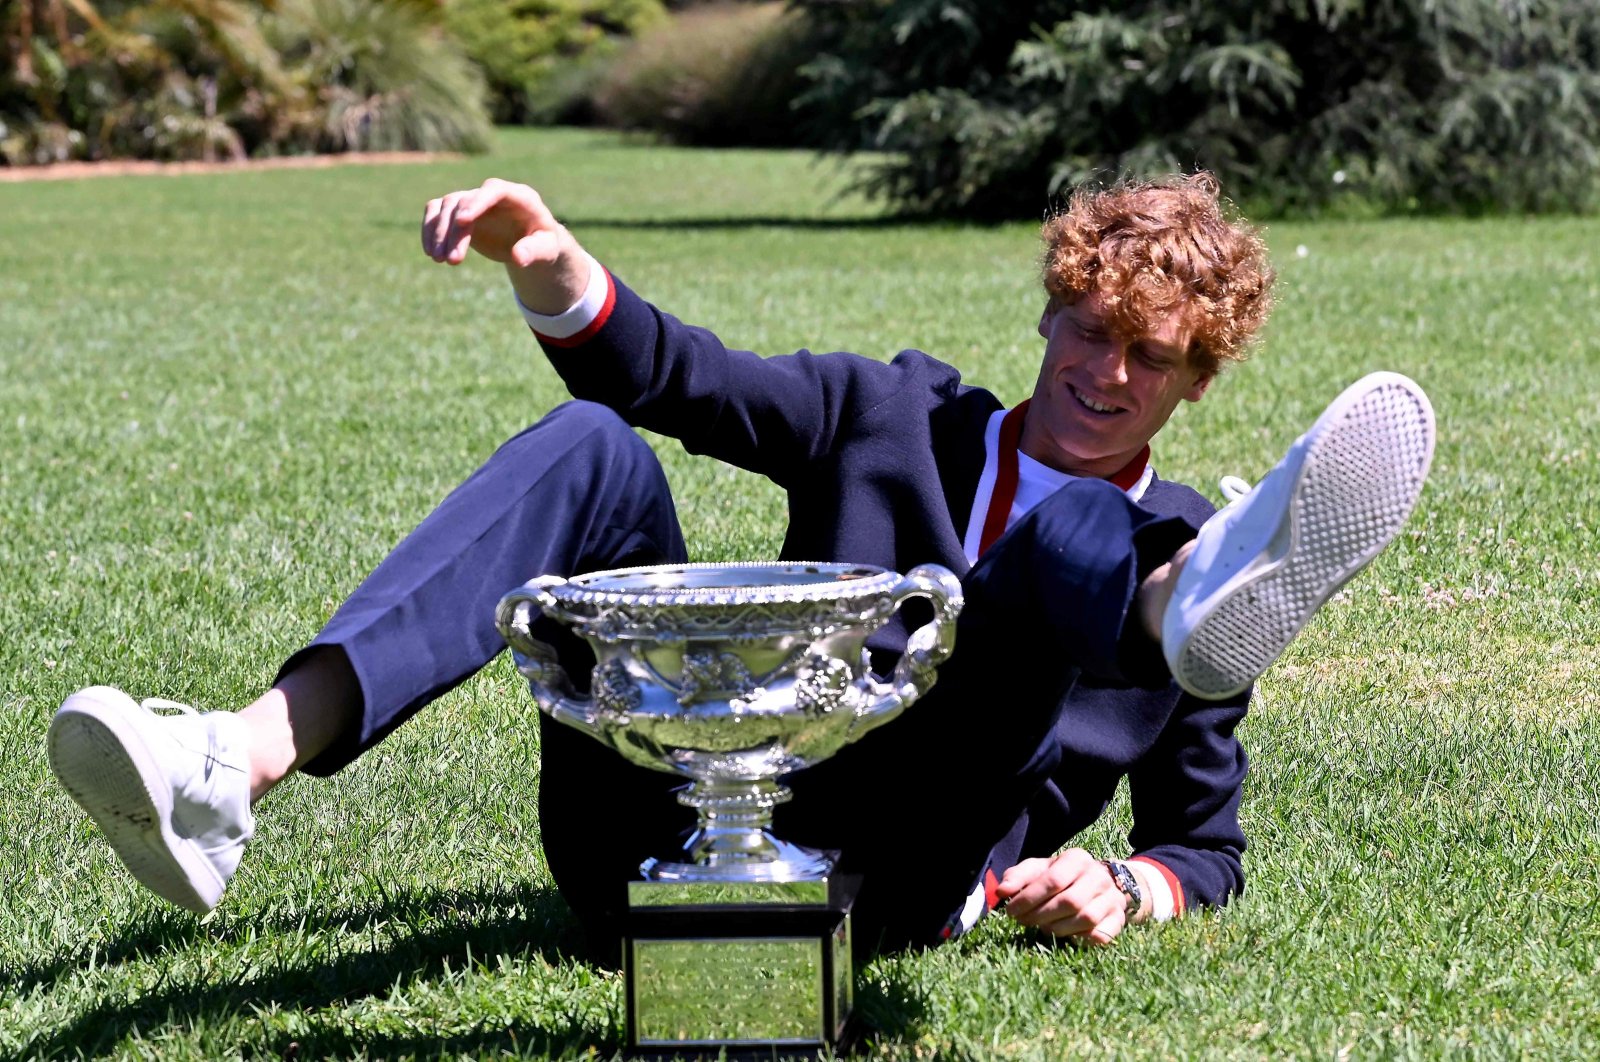 Italy&#039;s Jannik Sinner poses with the Norman Brookes Challenge Cup trophy at the Royal Botanic Gardens following his victory against Russia&#039;s Daniil Medvedev in the men&#039;s singles final of the Australian Open, Melbourne, Australia, Jan. 29, 2024. (AFP Photo)